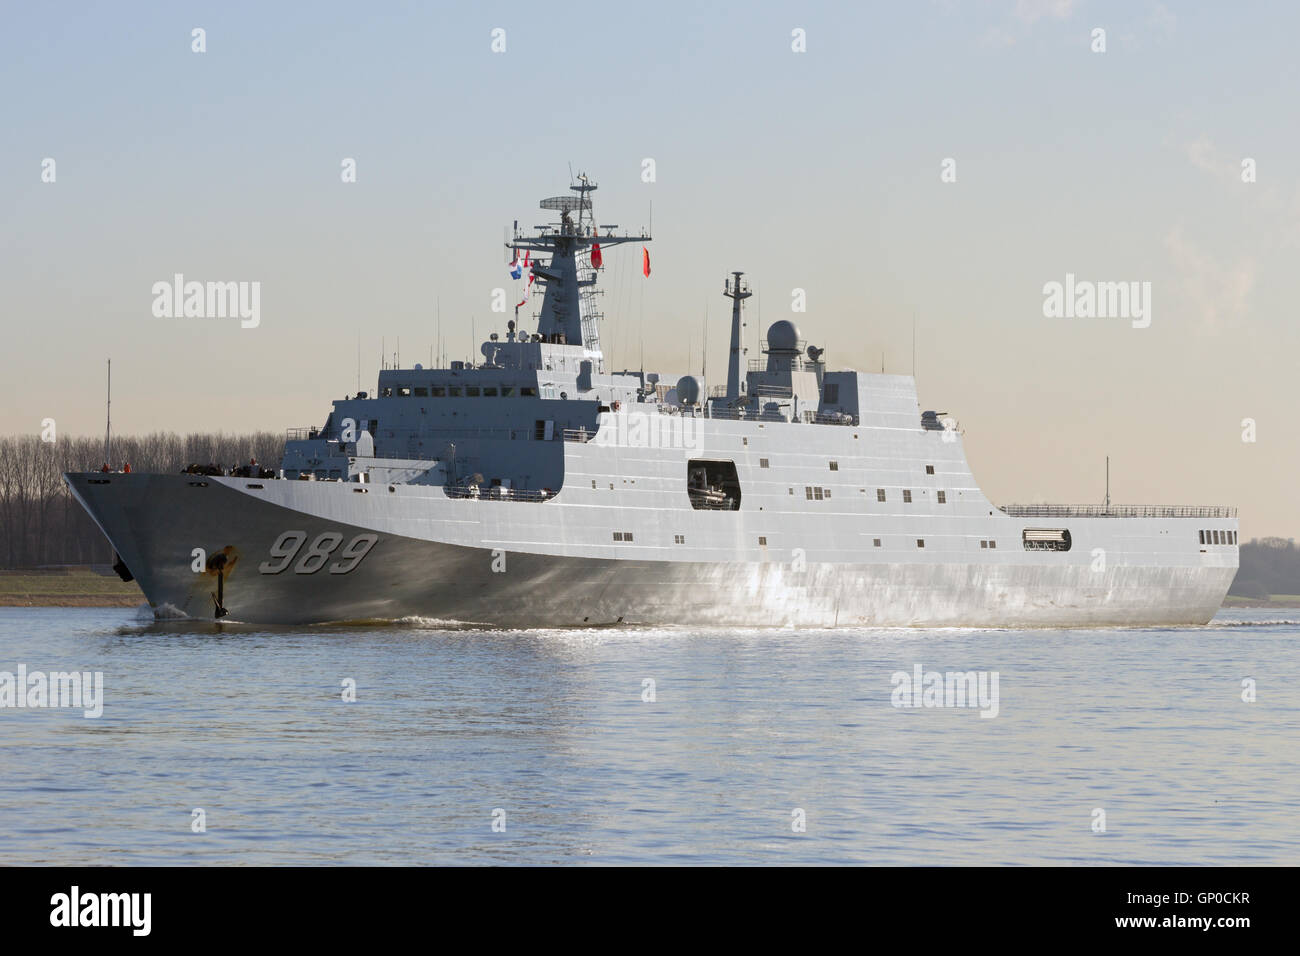 Chinese Navy amphibious transport ship Changbai Shan (989) leaving the Port of Rotterdam after the Stock Photo